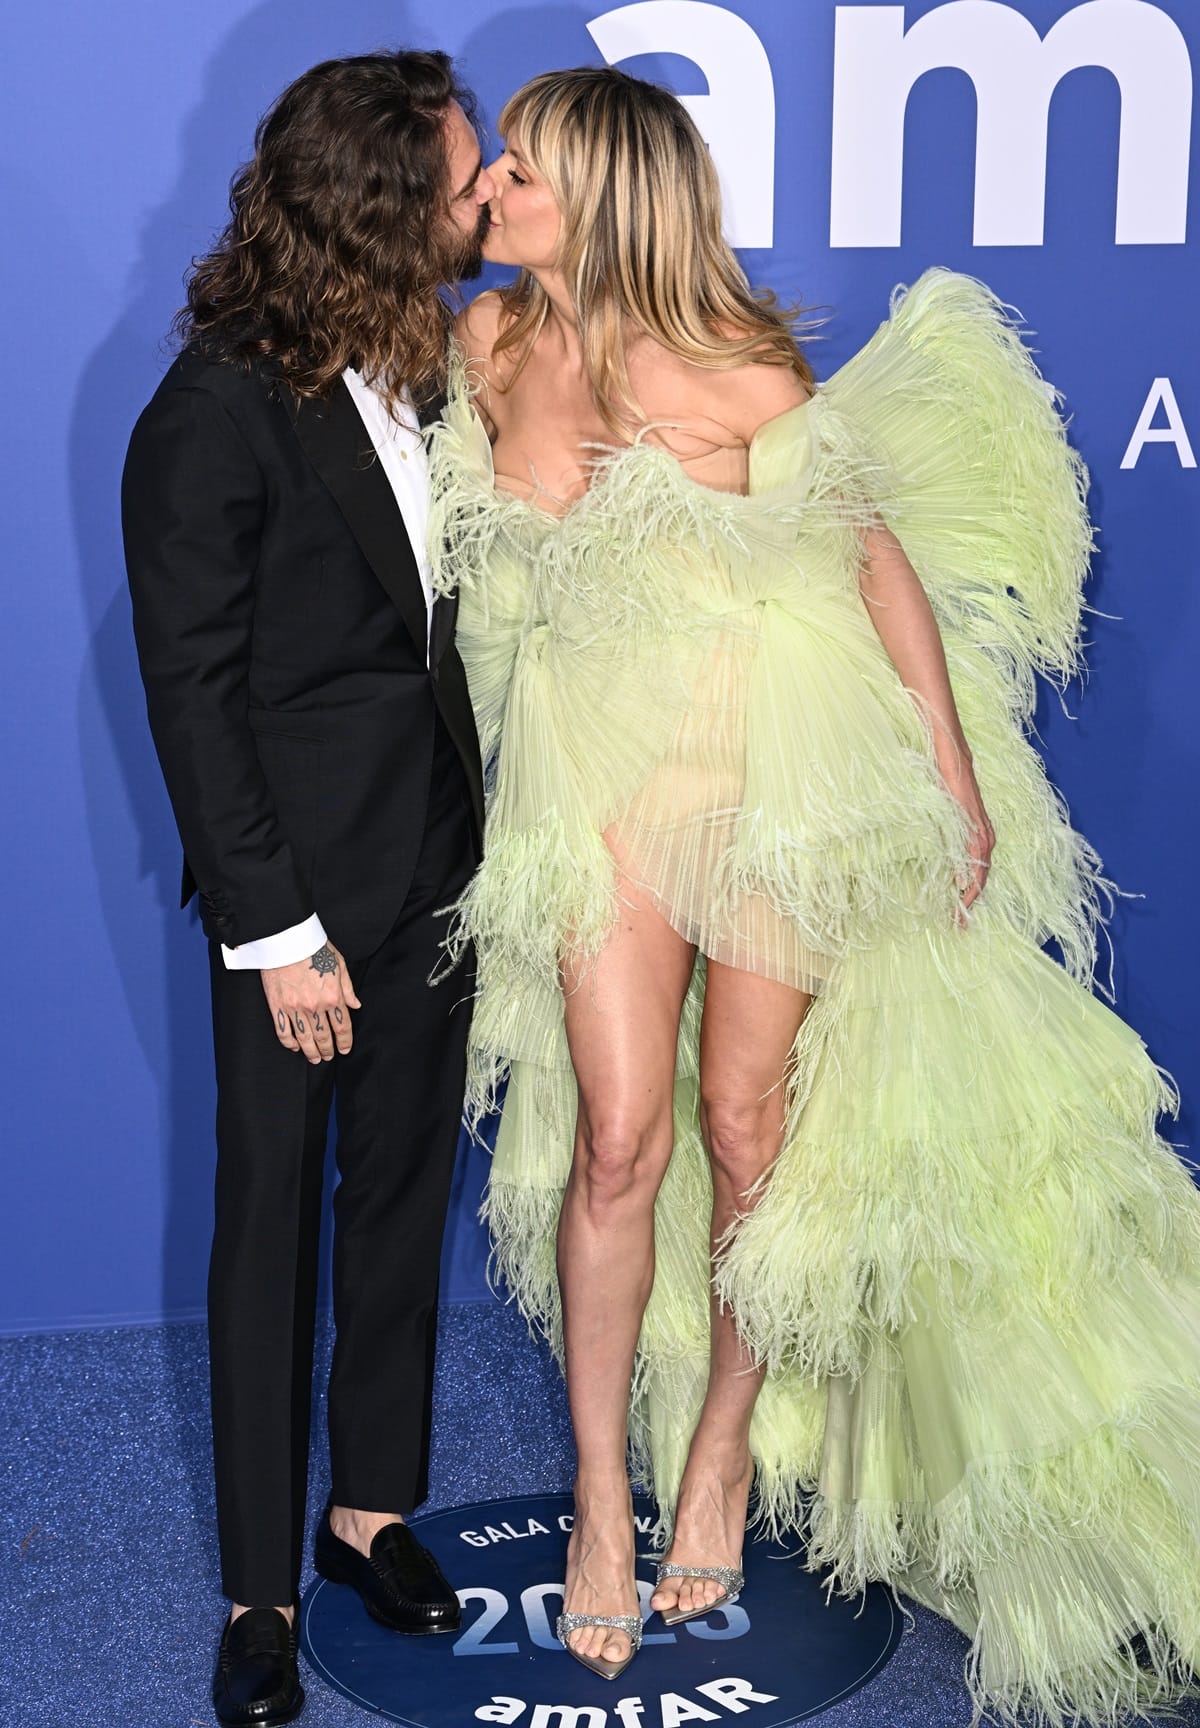 Tom Kaulitz and Heidi Klum, who share a 16-year age difference, share a passionate kiss at the amfAR Cannes Gala 2023